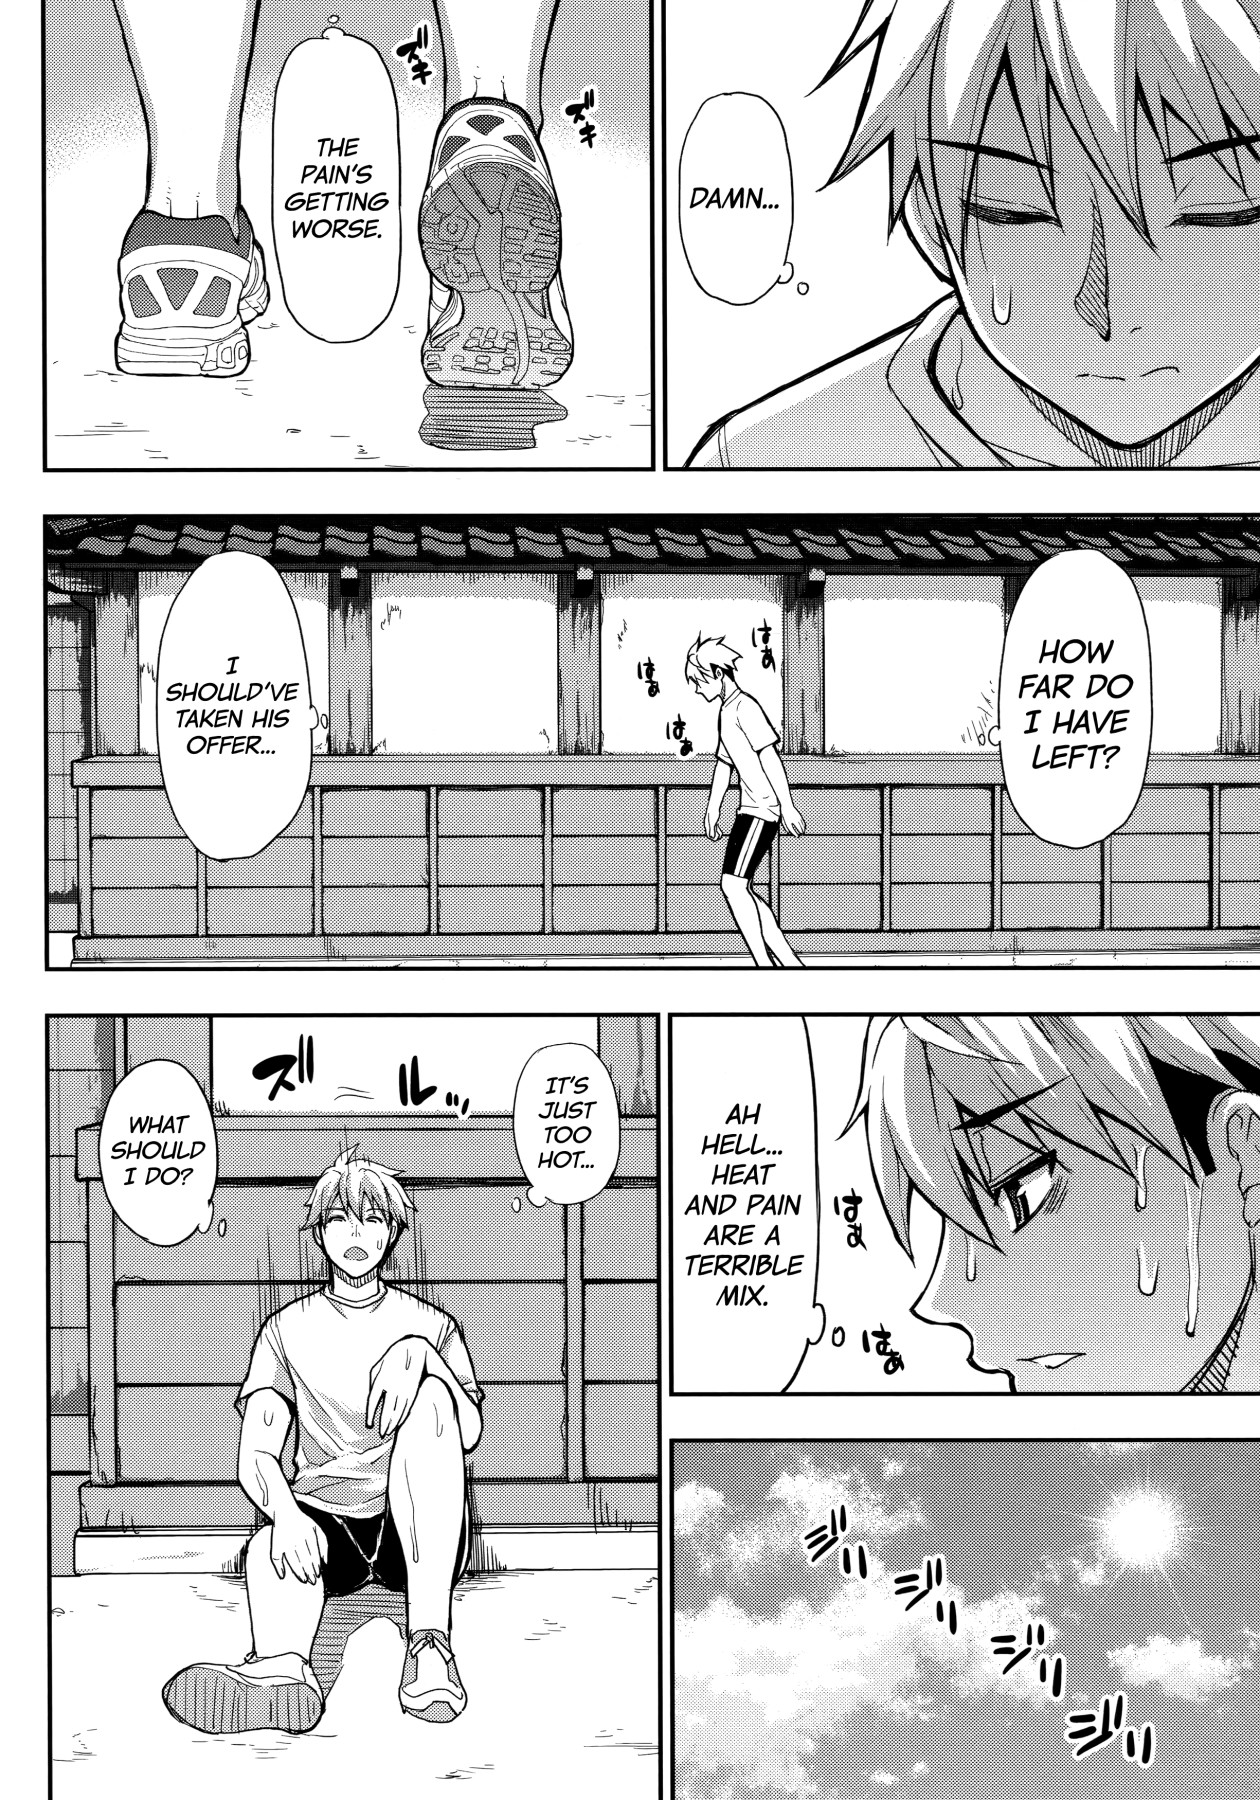 Hentai Manga Comic-Do Anything You Like To Me In Her Place-Chapter 4-1